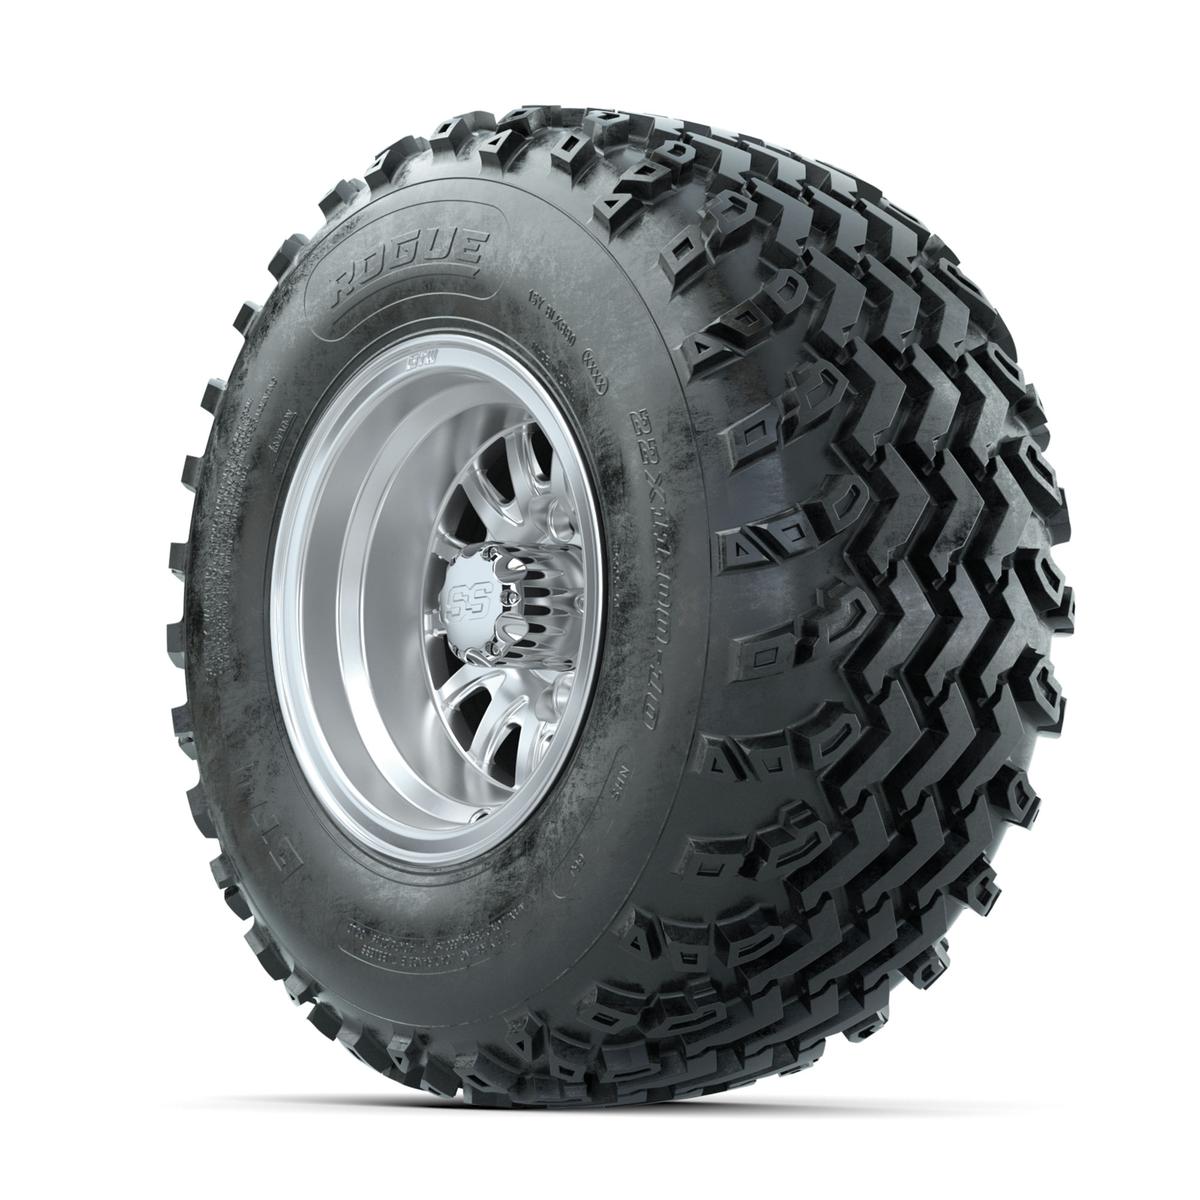 GTW Medusa Machined/Silver 10 in Wheels with 22x11.00-10 Rogue All Terrain Tires – Full Set